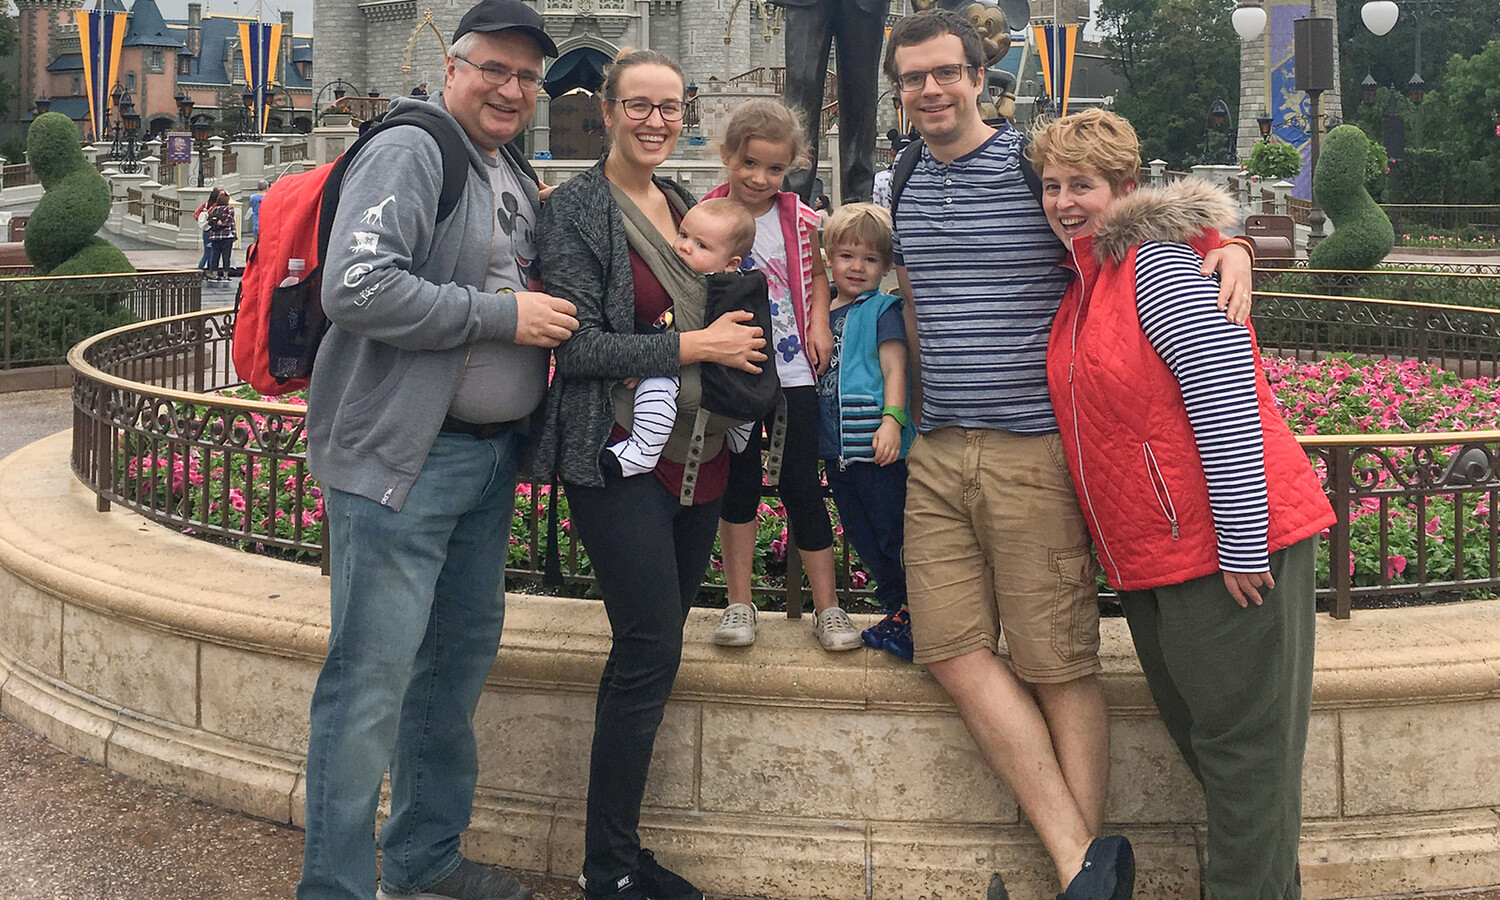 Family posing in front of the castle at Disney World.